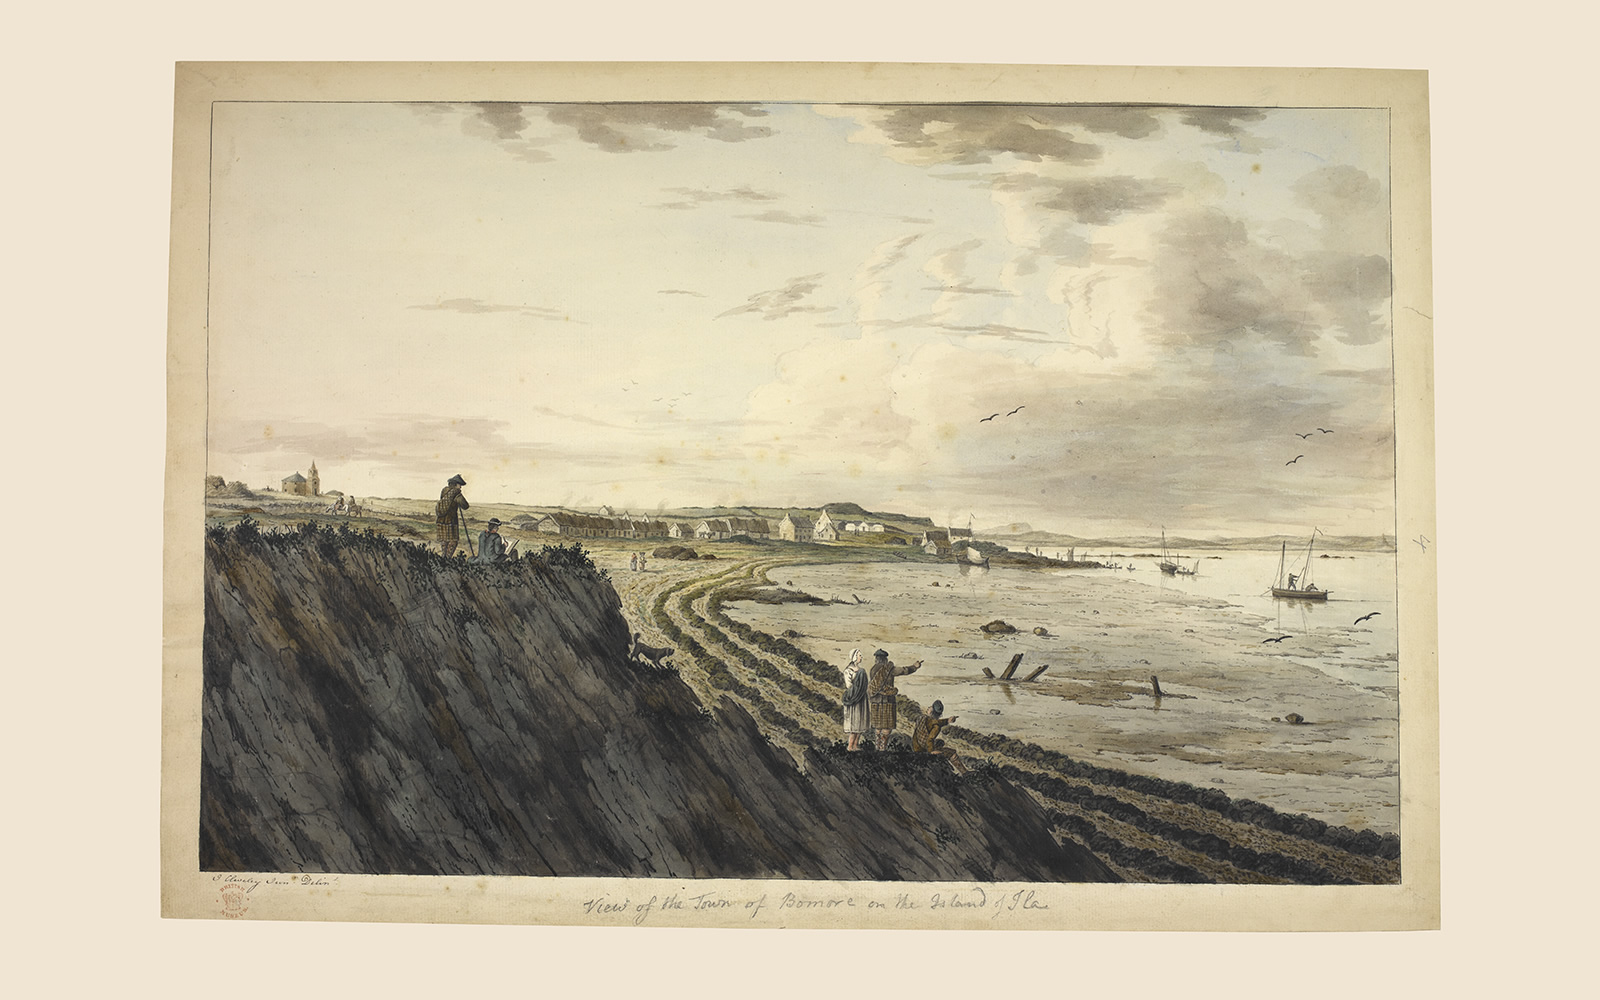 John Cleveley, 'View of the Town of Bomore on the Island of Ila' (British Library)